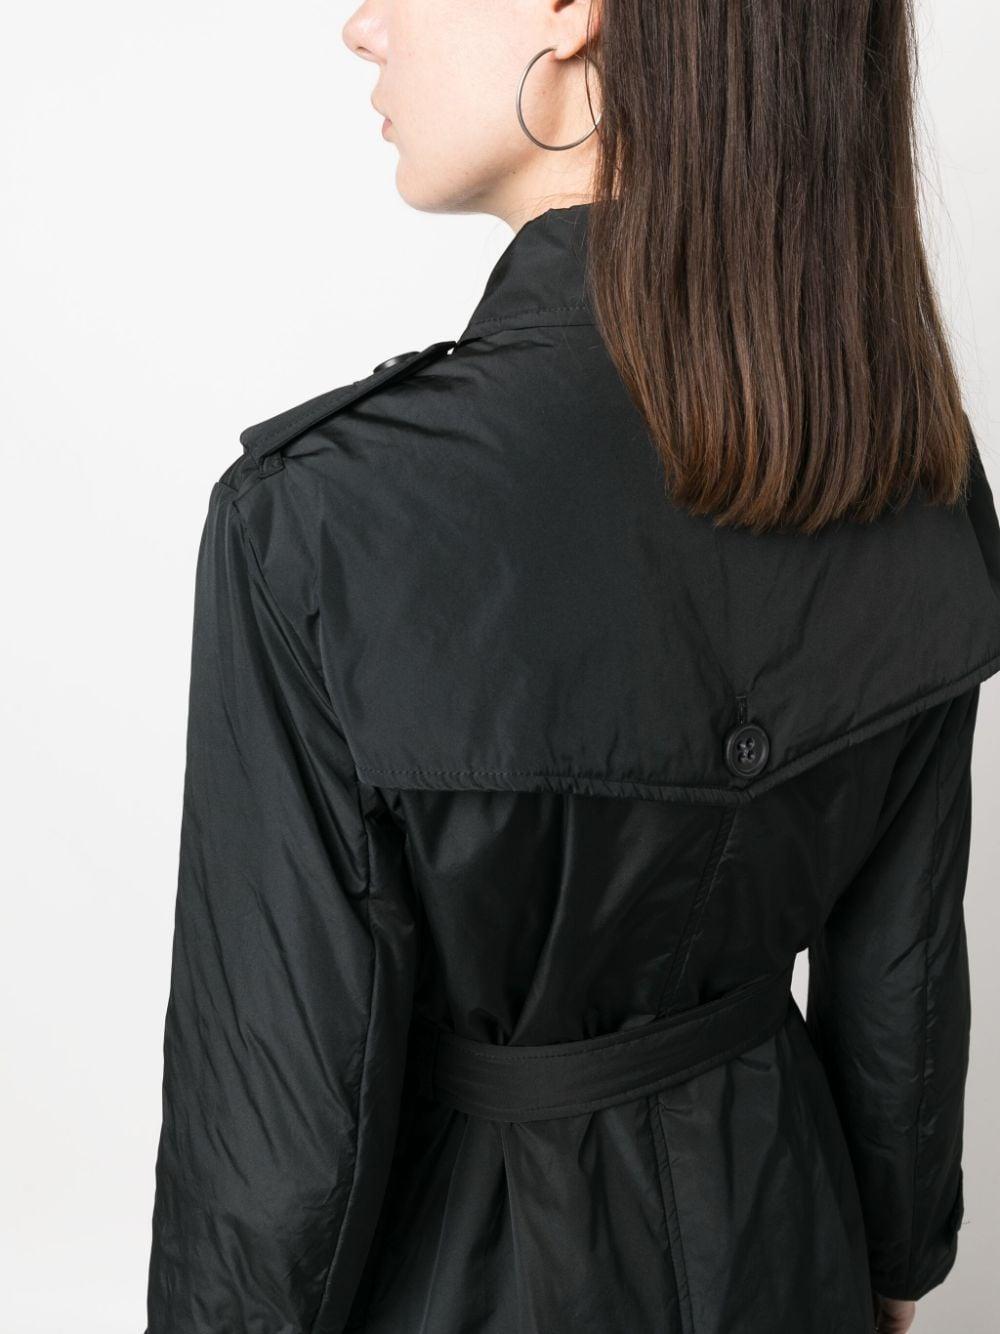 RED Valentino Double-breasted Coat in Black |